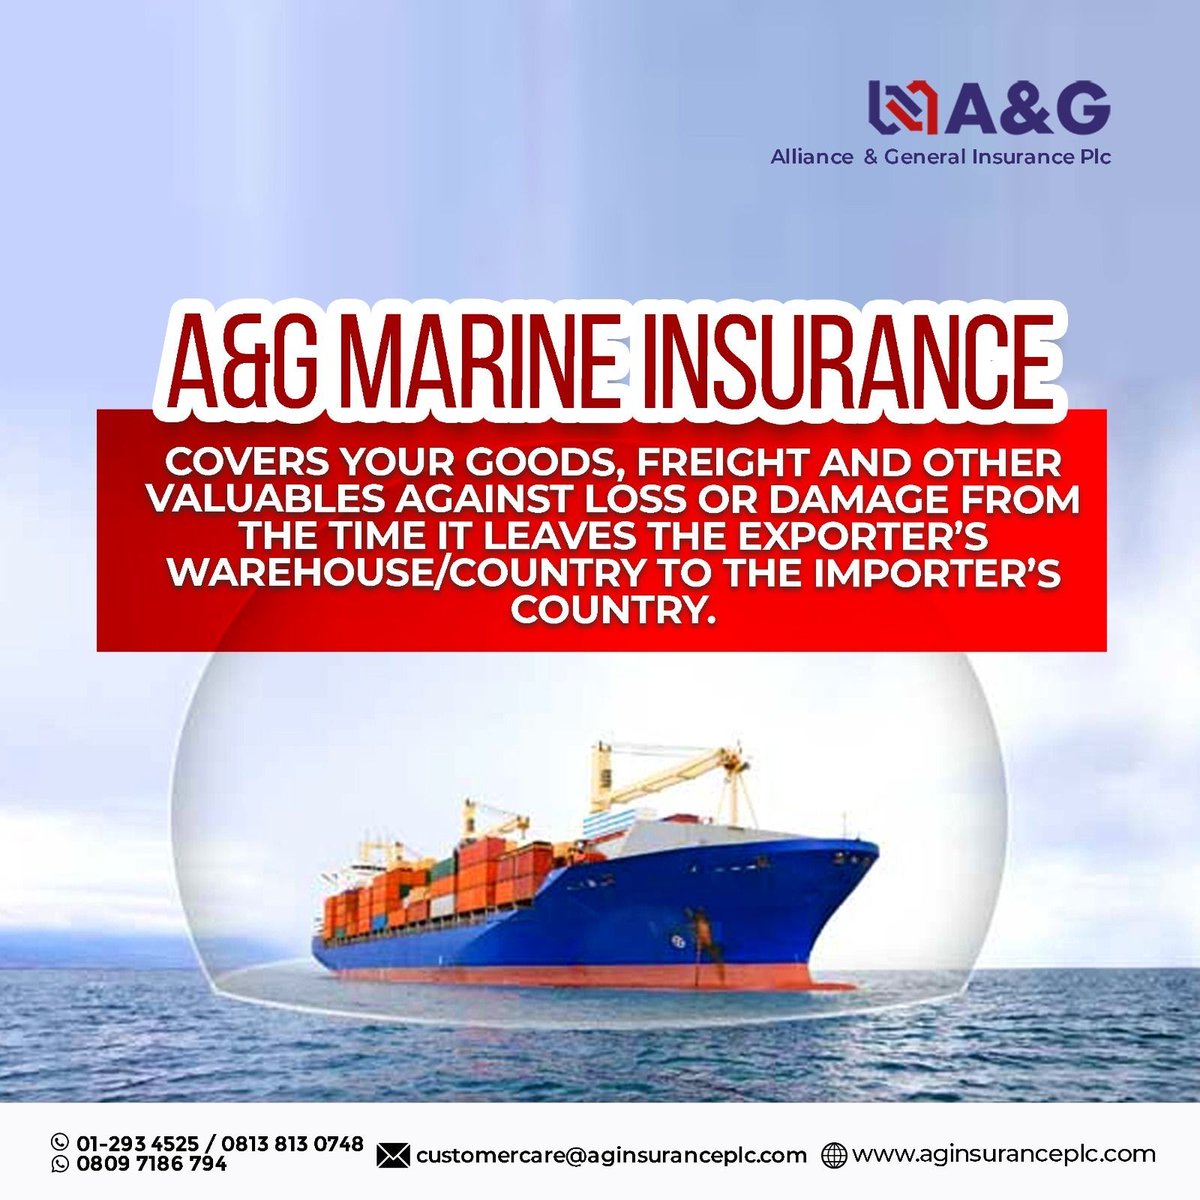 Smooth sailing ahead with A&G Marine Insurance! 🌊 

Protect your goods, freight, and valuables from departure to destination. We've got you covered at every port of call. Send us a DM to subscribe or for more inquiries. 

#MarineInsurance #CargoProtection #AllianceAndGeneral